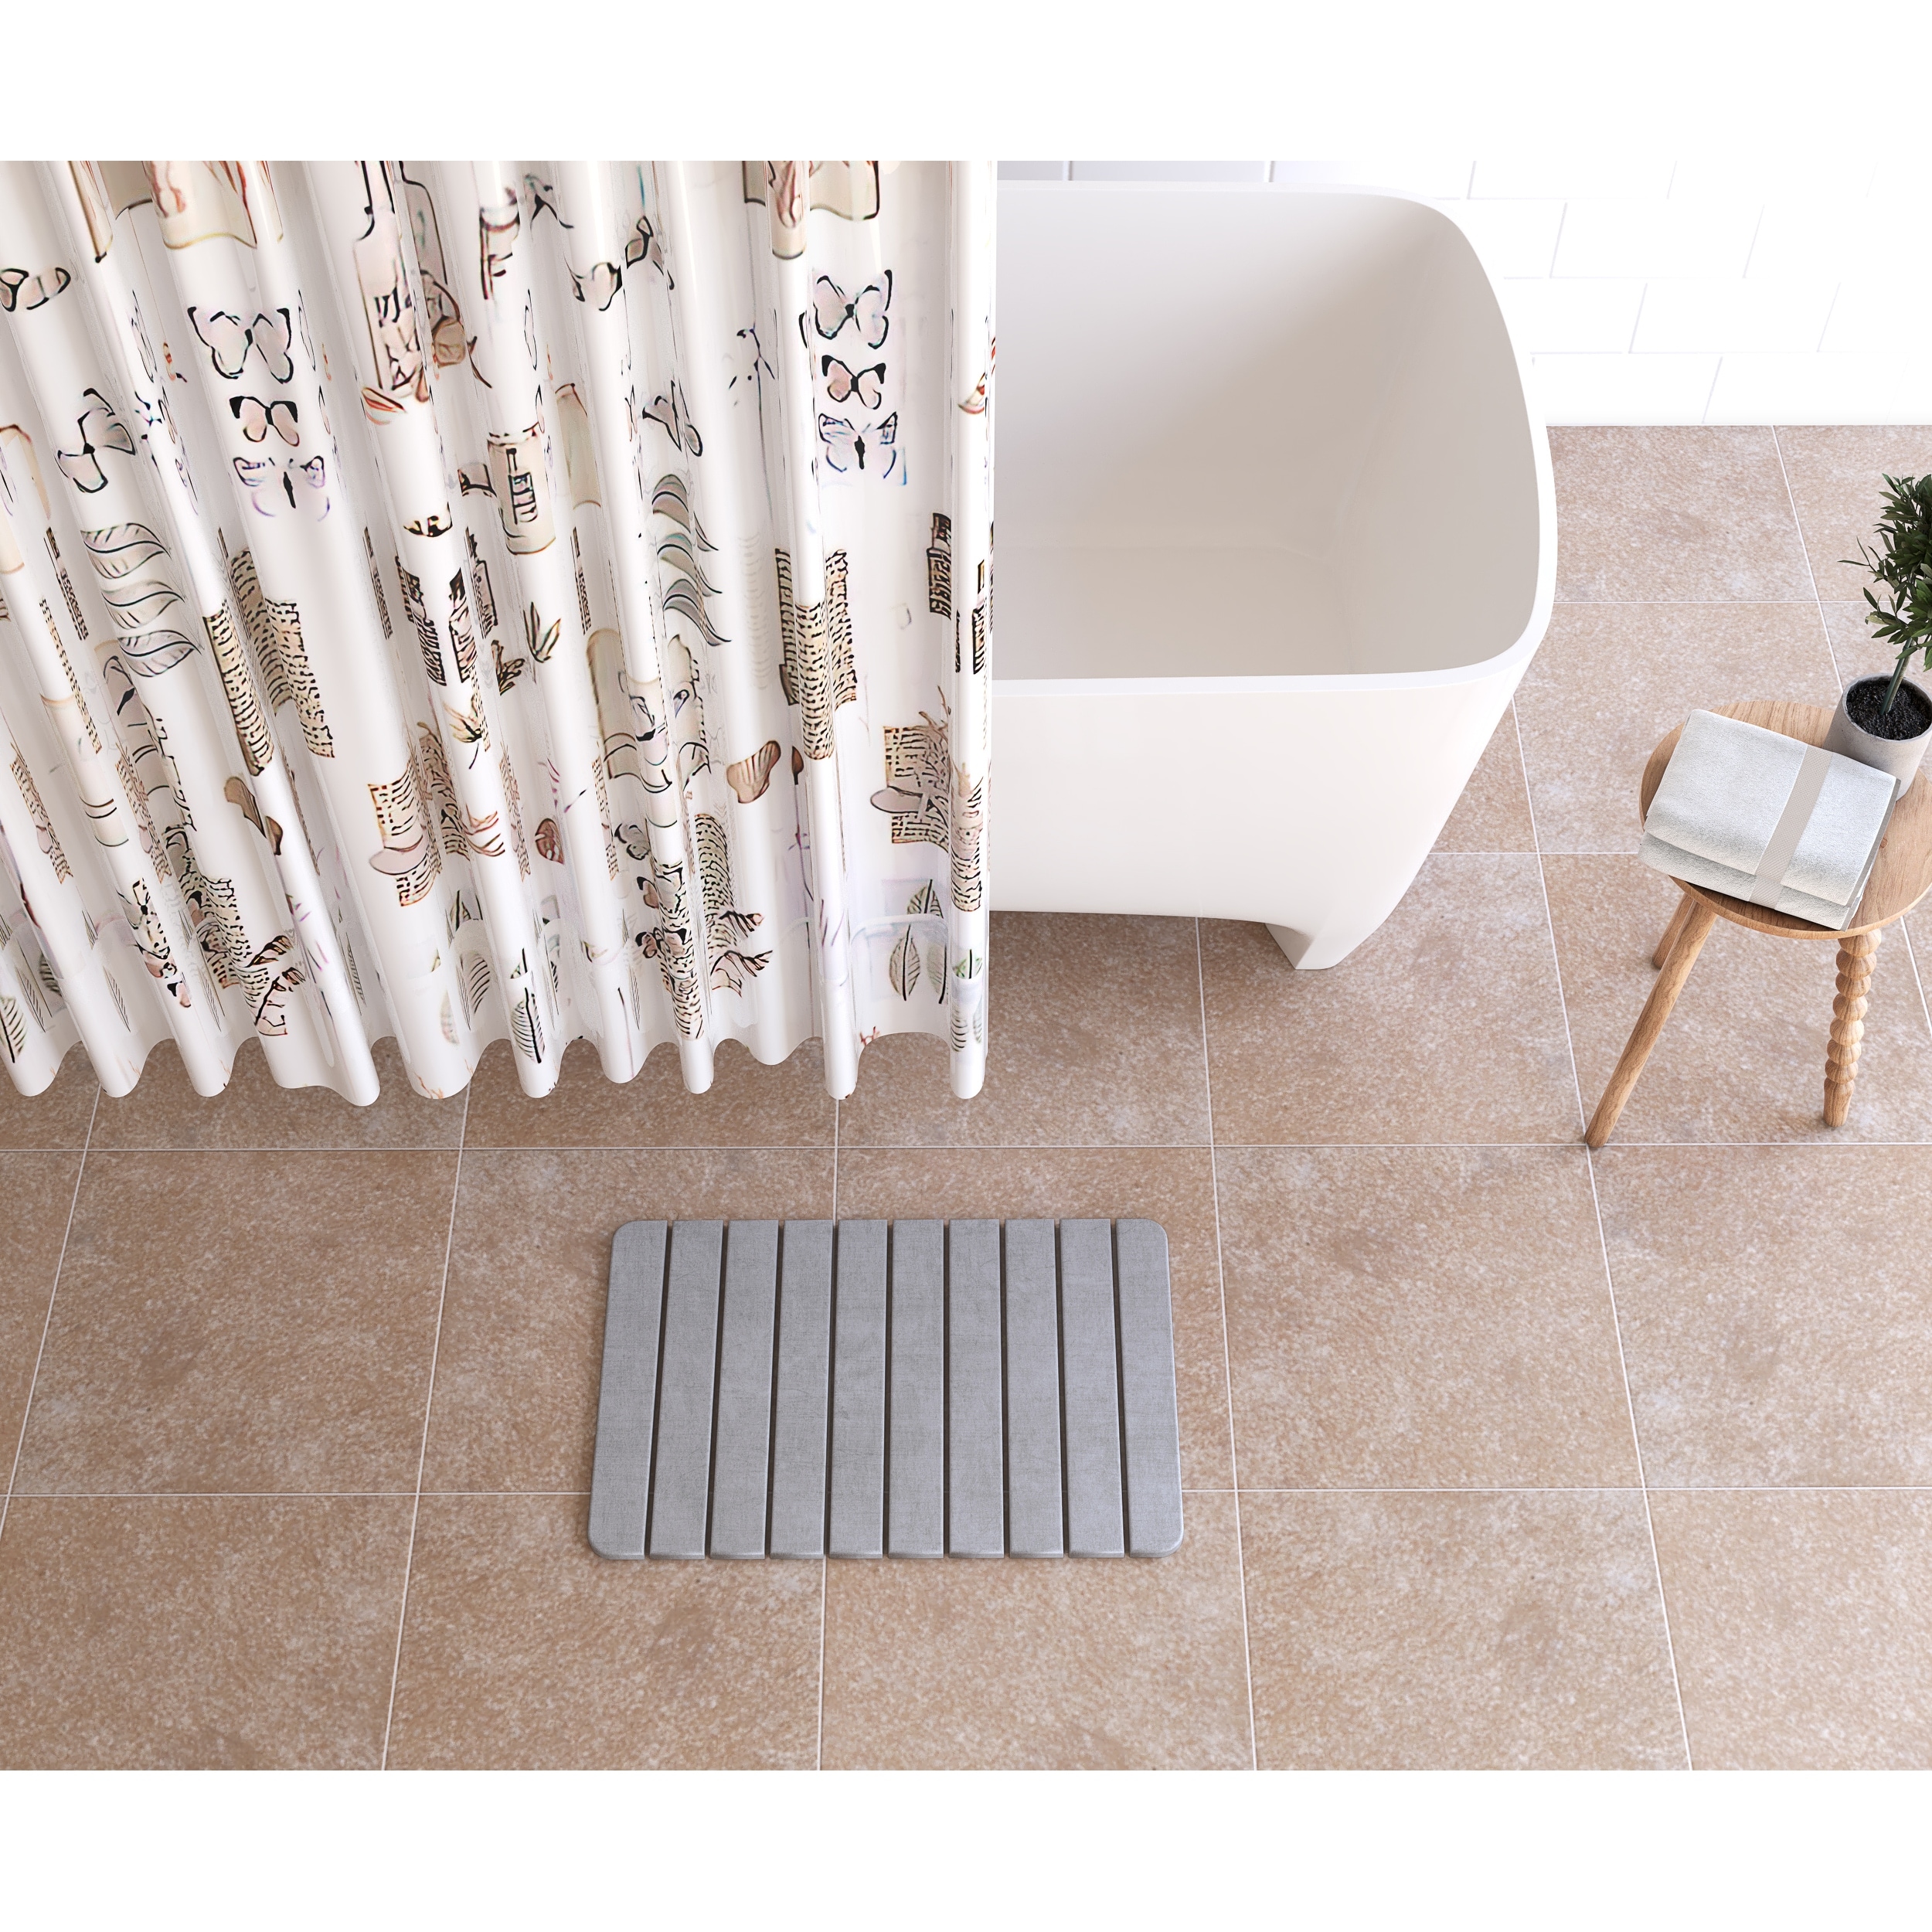 https://ak1.ostkcdn.com/images/products/is/images/direct/b1420ca21c870226910579e1ee6b4ea2632e2abe/Quick-Drying-Diatomite-Stone-Bath-Mat.jpg